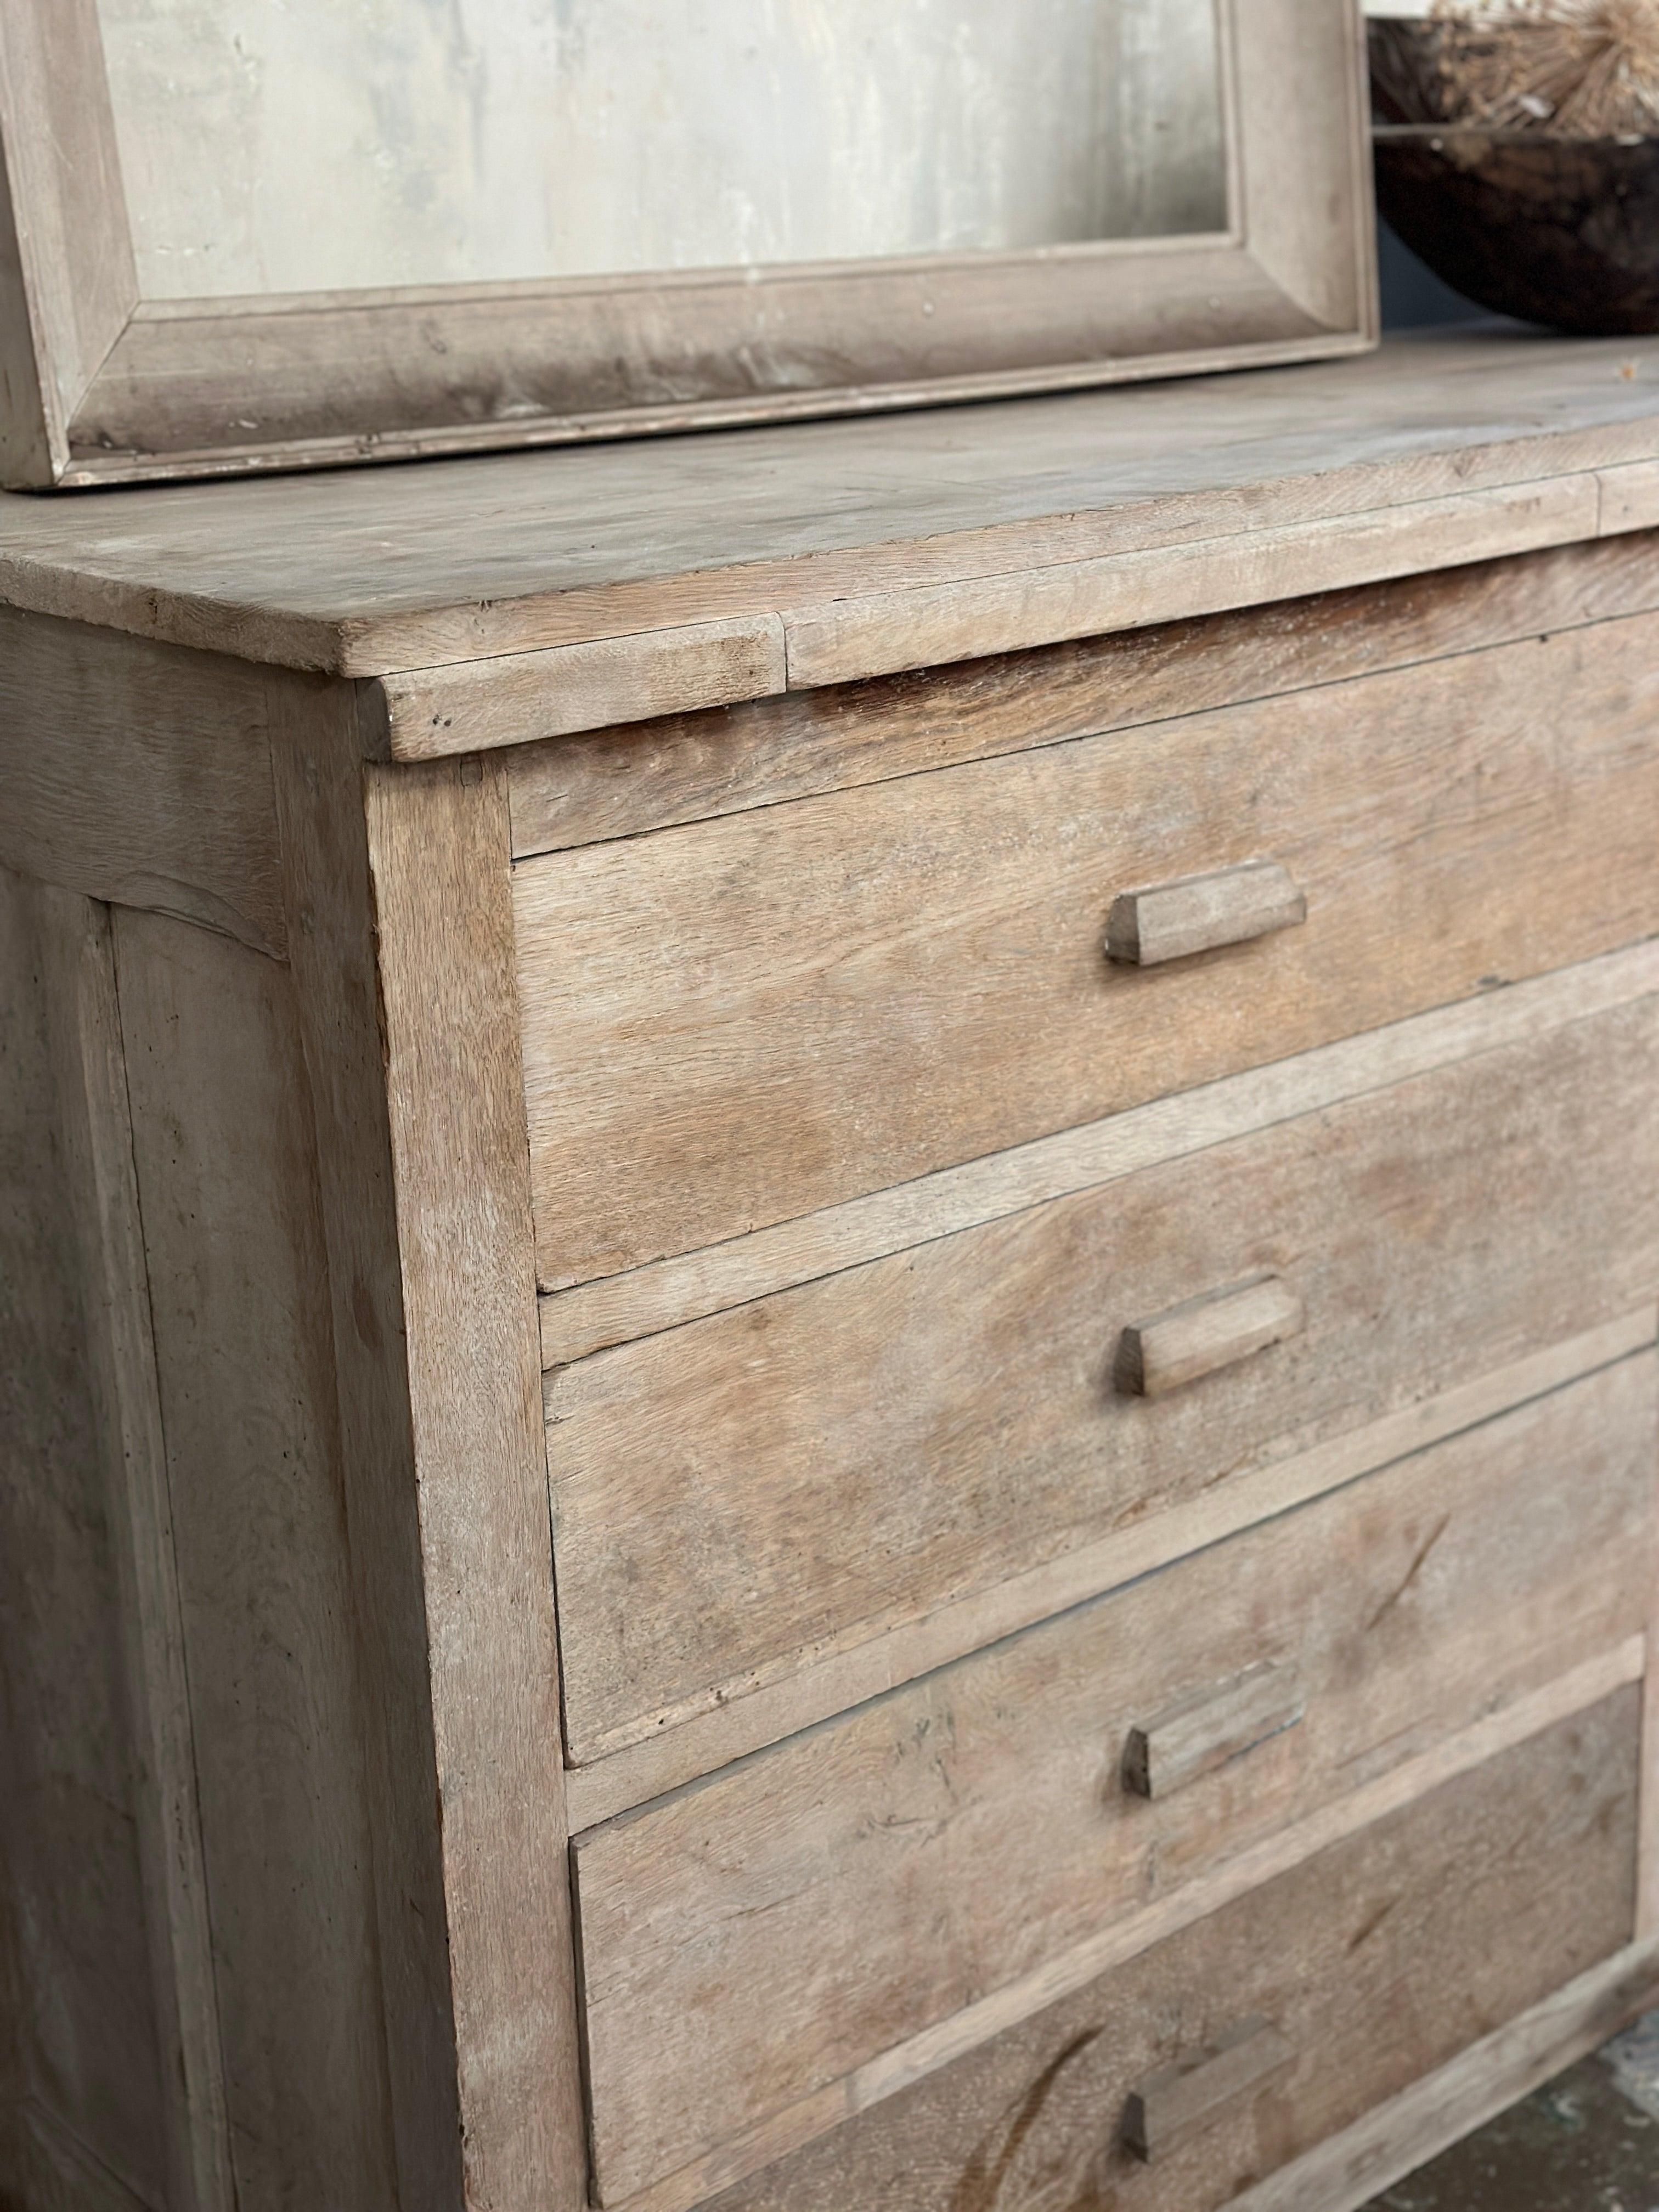 Lime washed oak bank of drawers